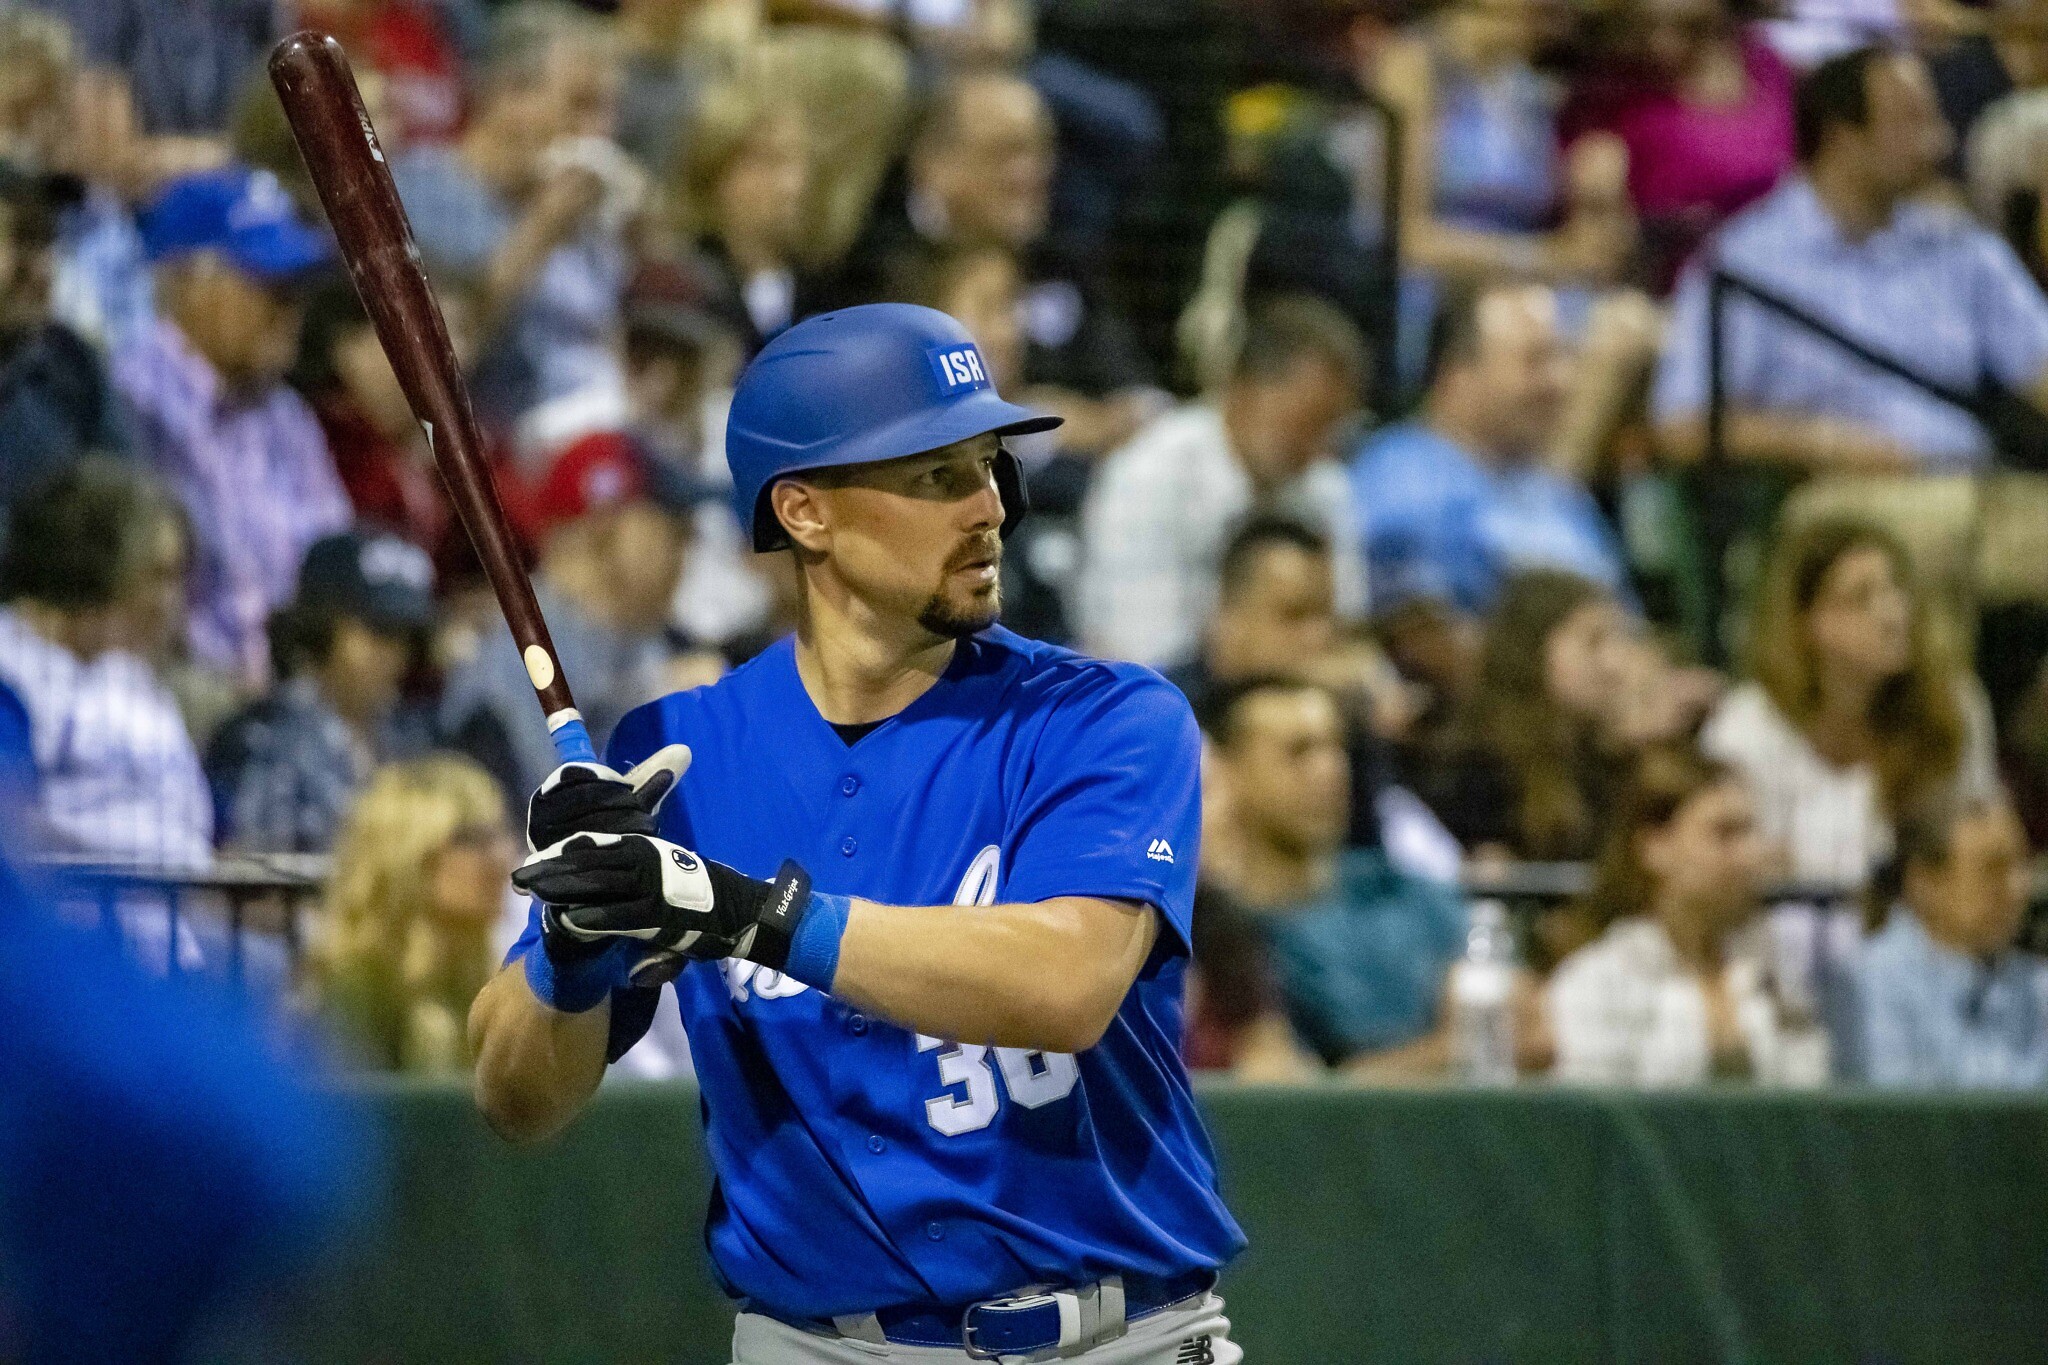 Ryan Lavarnway goes to bat for Team Israel in this undated photo. (Courtesy IAB)